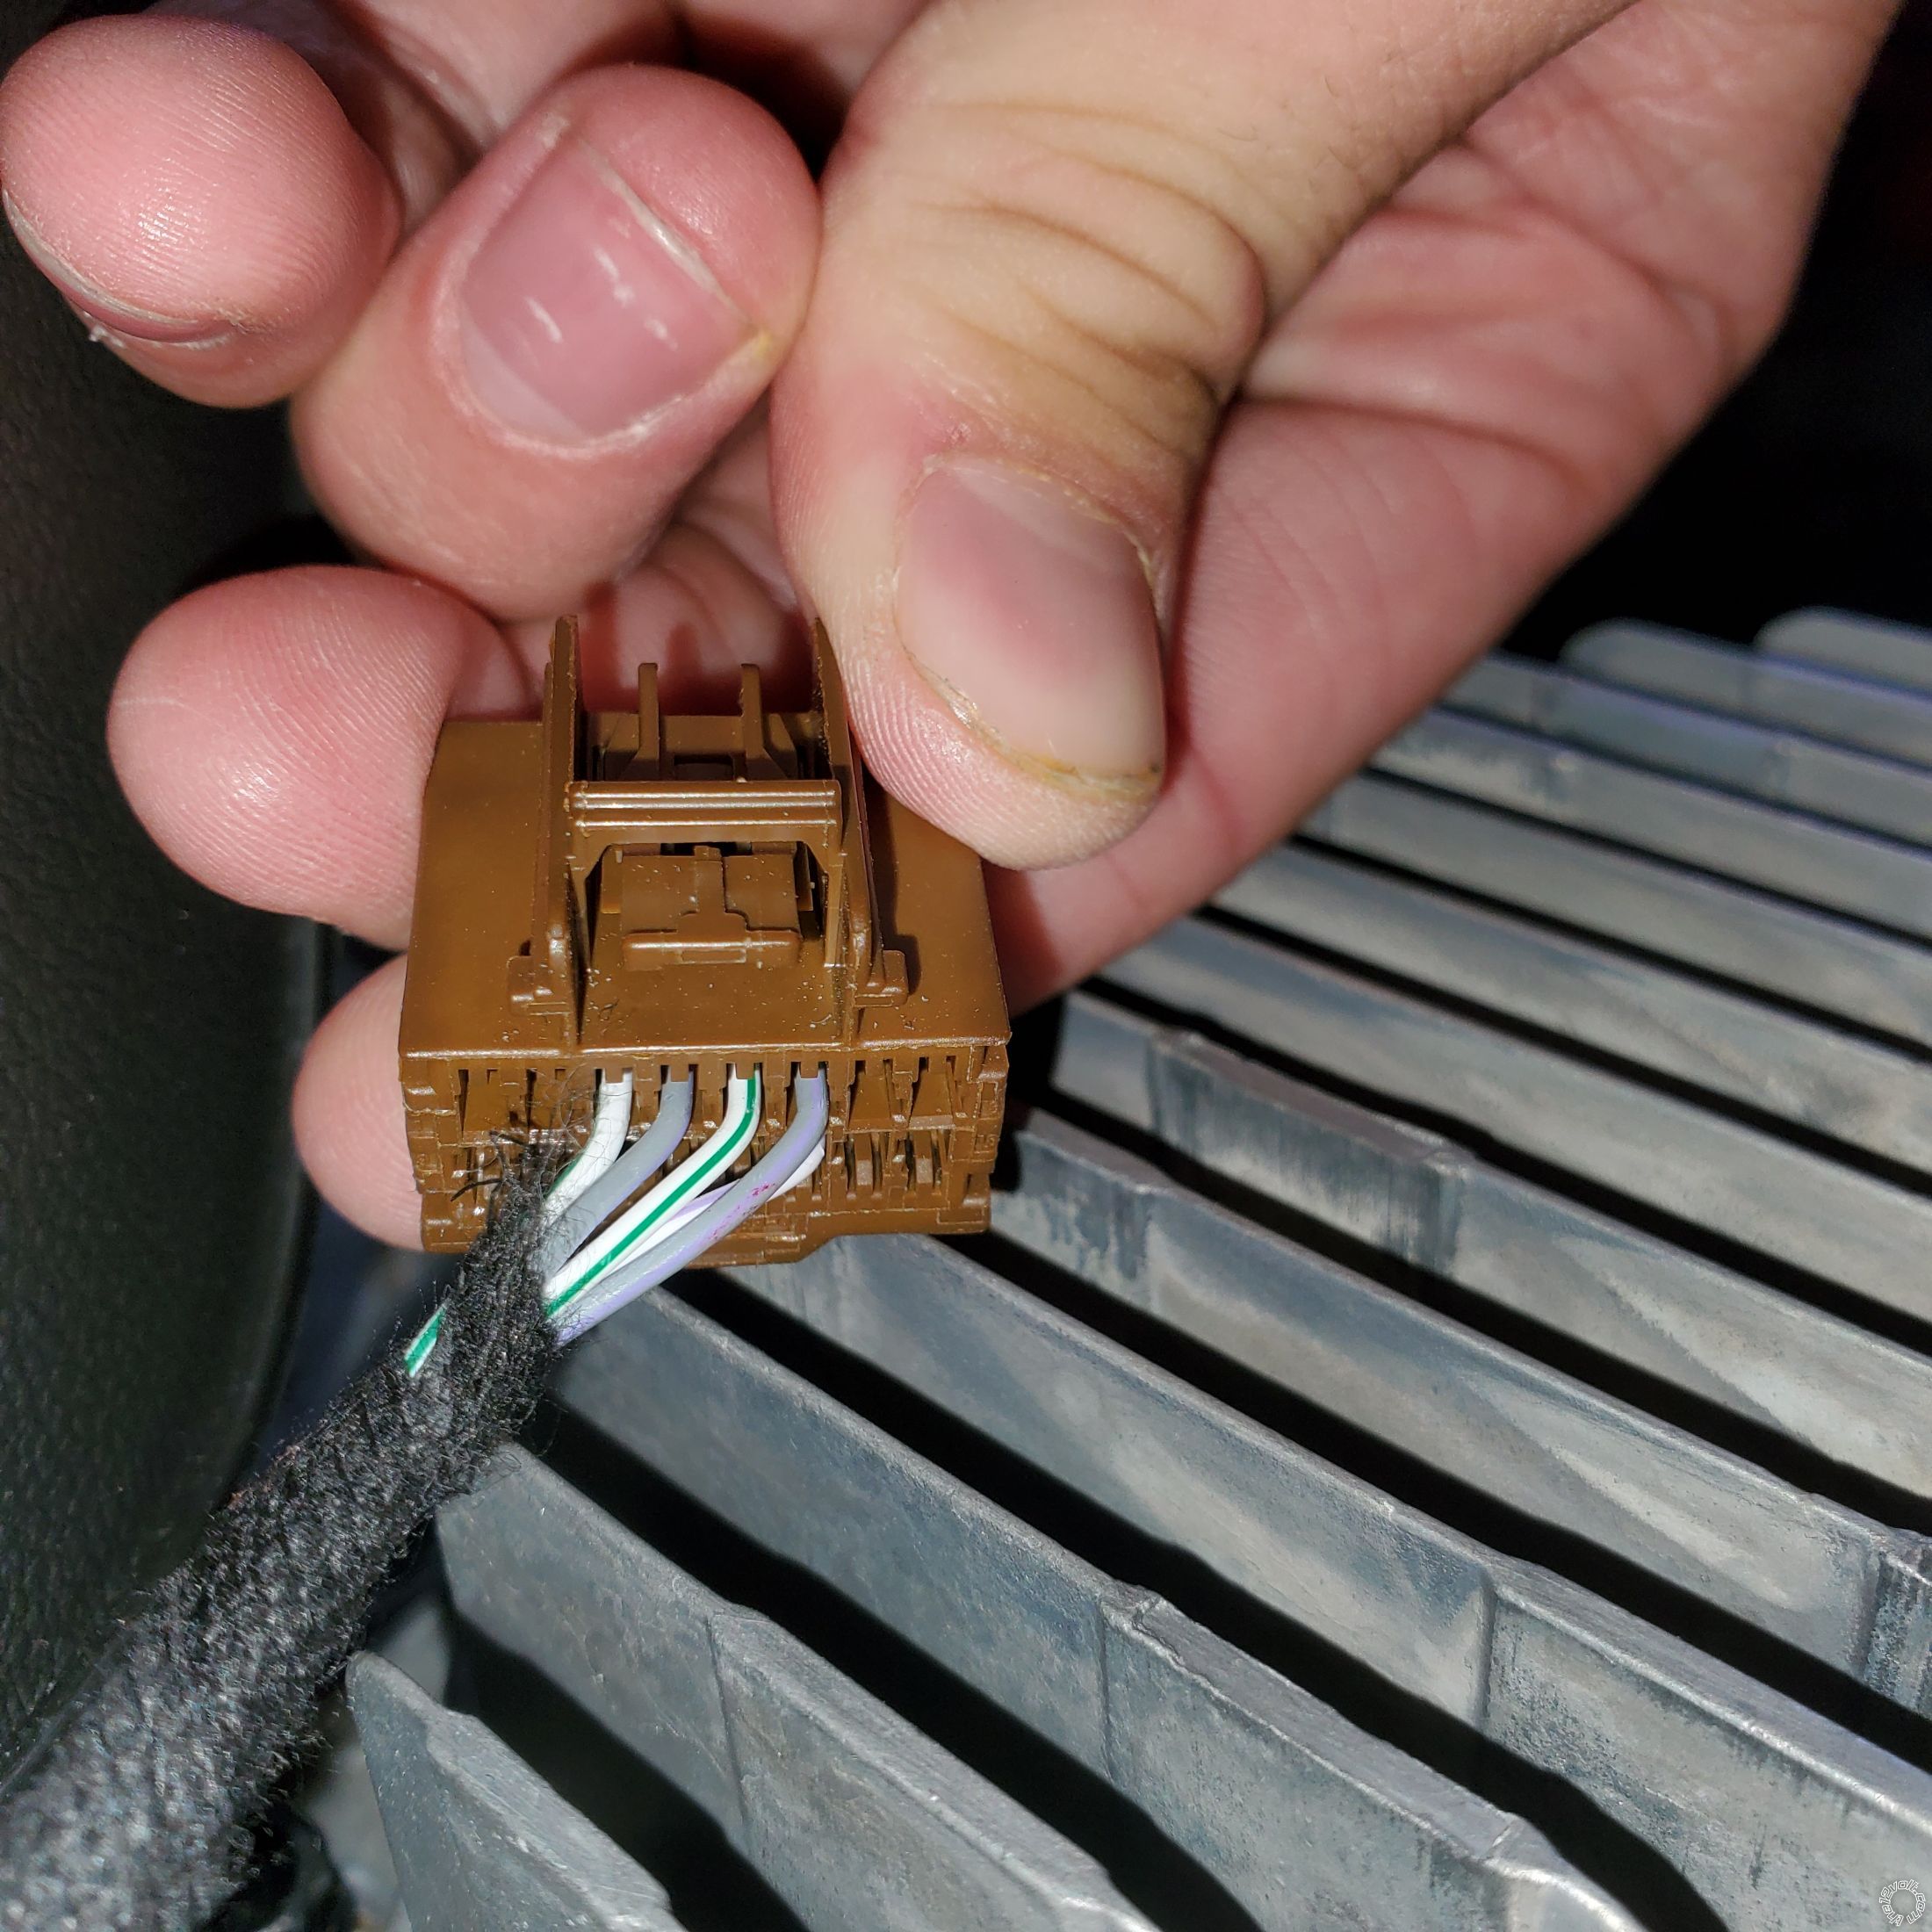 2018 Buick Encore Amplifier Wiring - Last Post -- posted image.